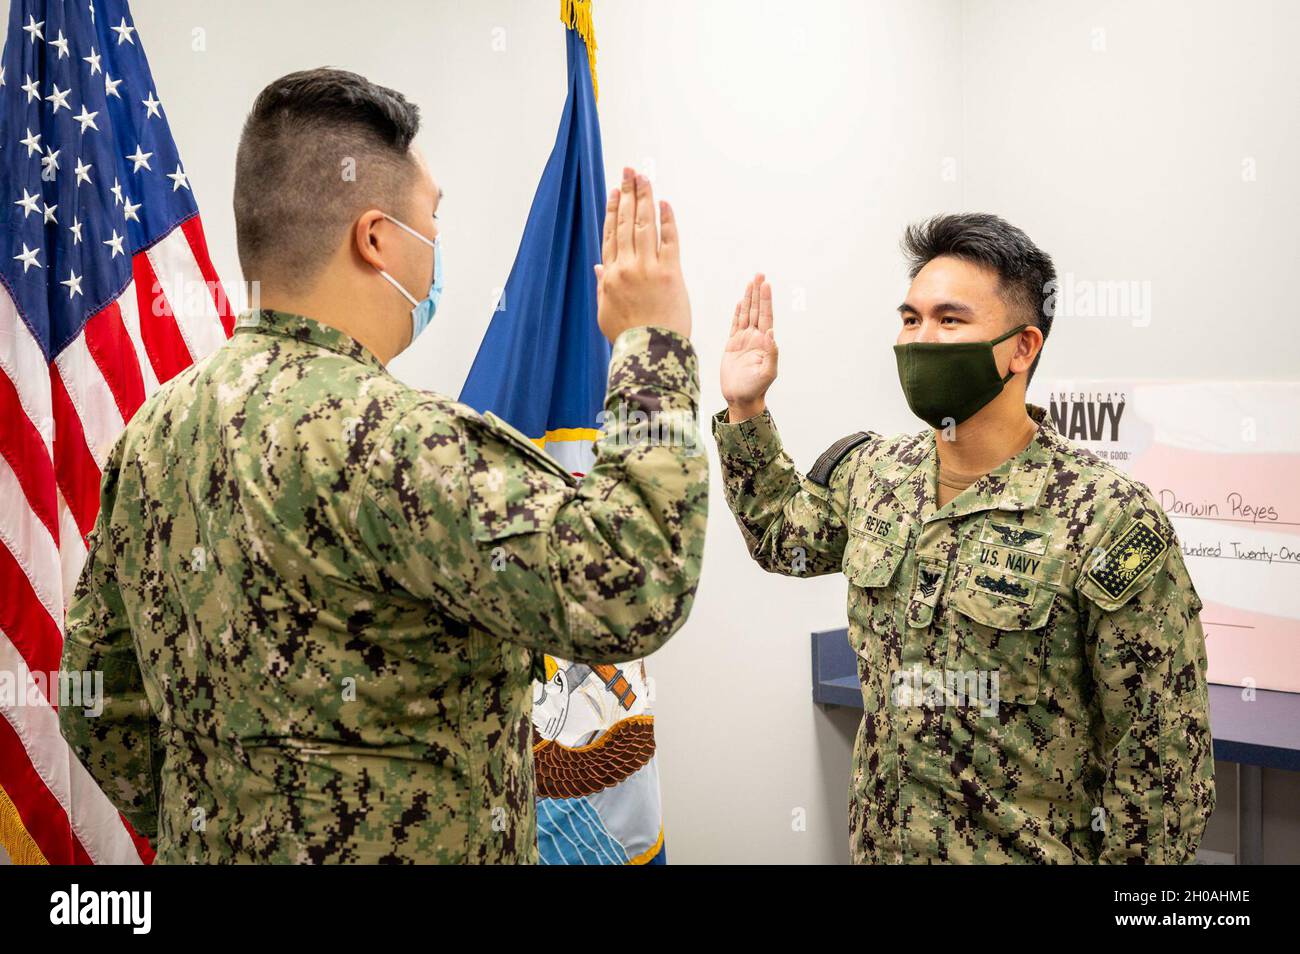 210111-N-WF272-1029 TOWSON, Md. (Jan. 11, 2021) Aviation Boatswain’s Mate (Equipment) 1st Class Darwin Reyes, right, from Fairfax, Va., assigned to Navy Talent Acquisition Group Philadelphia, recites the oath of enlistment given by Lt. Wobin Ko during a reenlistment ceremony held at Navy Talent Acquisition Center Baltimore. Reyes reenlisted for four more years in the Navy. NTAG Philadelphia encompasses regions of Pennsylvania, New Jersey, Delaware, Maryland and West Virginia, providing recruiting services from more than 30 talent acquisition sites with the overall goal of attracting the highes Stock Photo